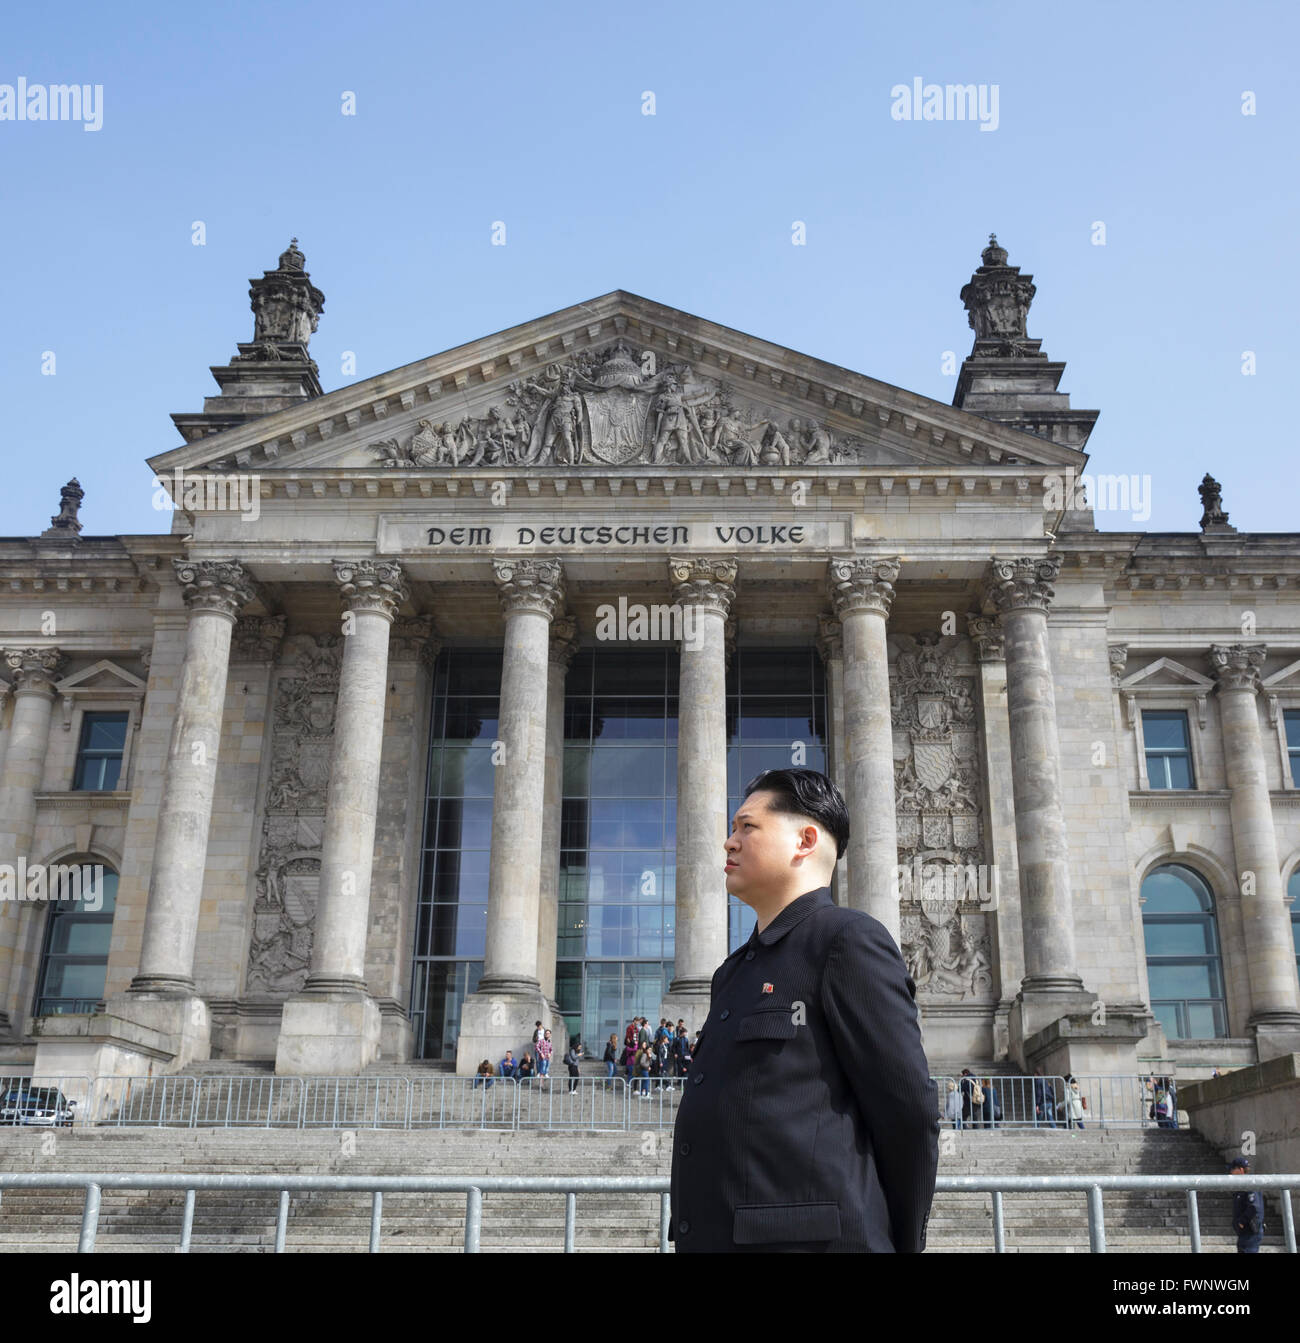 Berlin, Germany. 6th April 2016. Kim Jong Un impersonator, Howard X from Hong Kong, visited Berlin, touring the major tourist sites to the surprise of tourists and locals. Howard was visiting Germany to film an advertisement for the popular German TV show 'Schlag den Star' with comedian Elton.  Here at the Reichstag / Bundestag Stock Photo